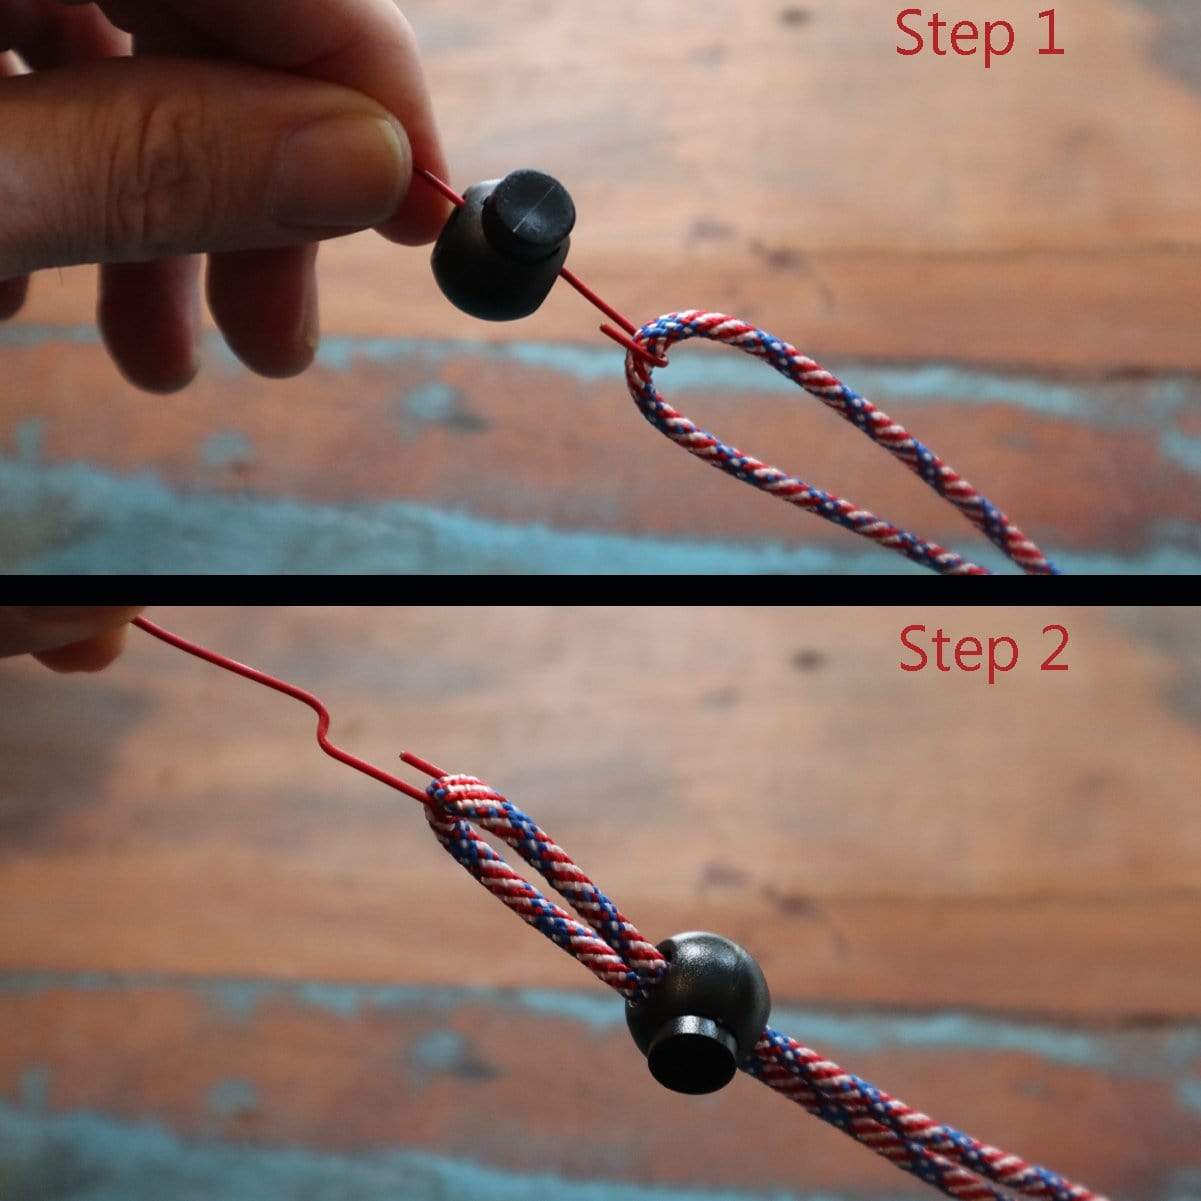 Close-up of hands demonstrating two steps to use Adjustable Cord Lock - Round Ball Style - Single Hole End Toggle for DIY Projects (2135-4001). Step 1: Insert a red wire through the ball-shaped end stopper. Step 2: Use the wire to pull the paracord loop through the toggle.